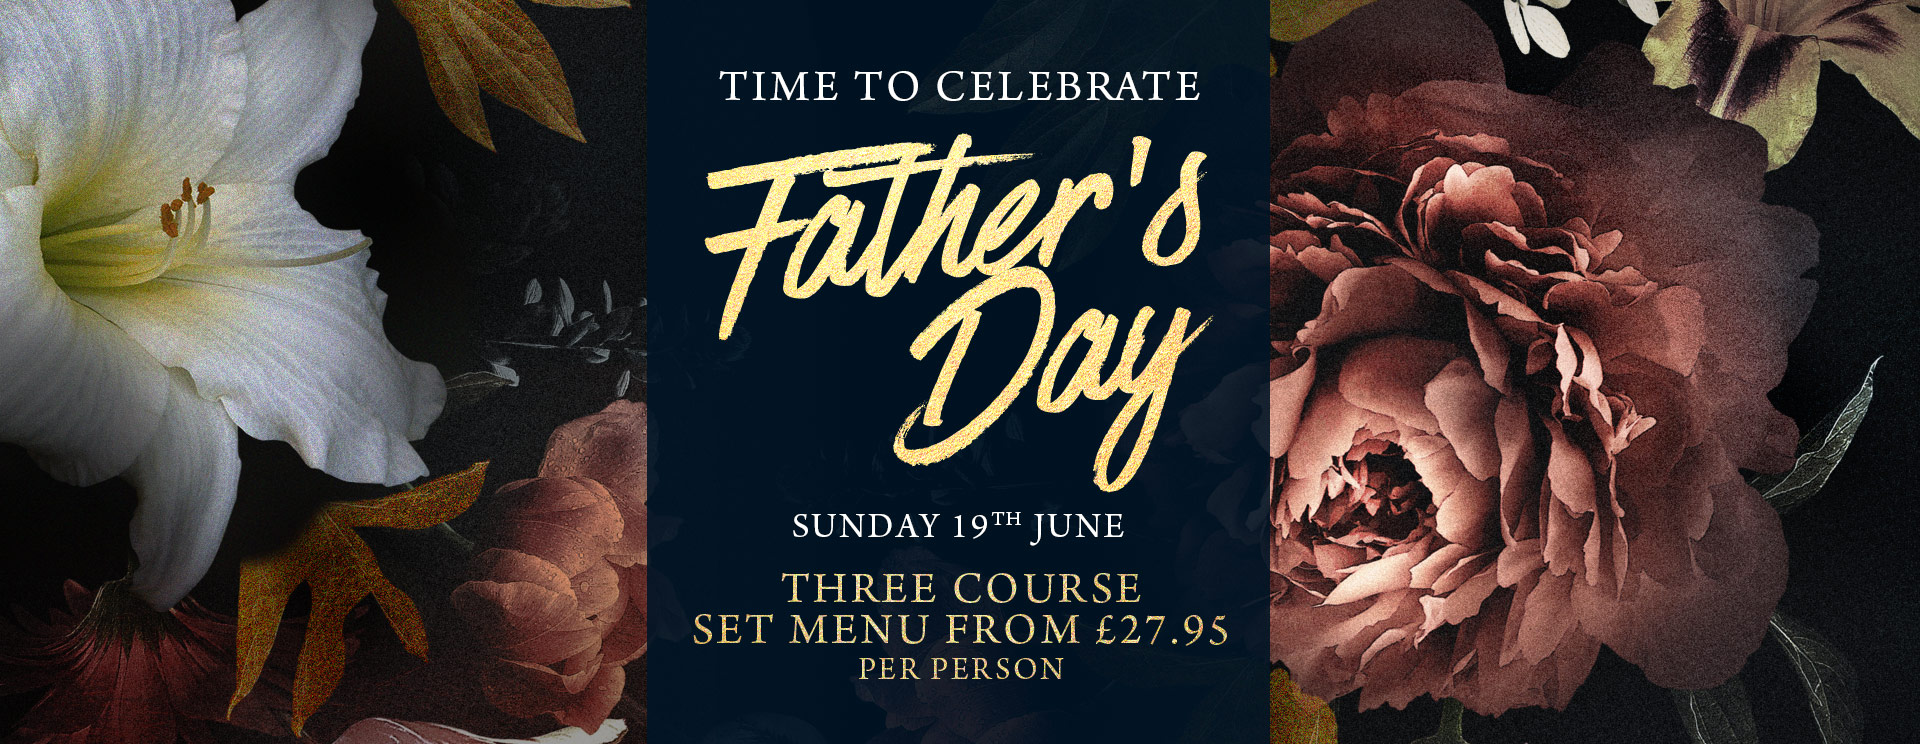 Fathers Day at The Trout Inn